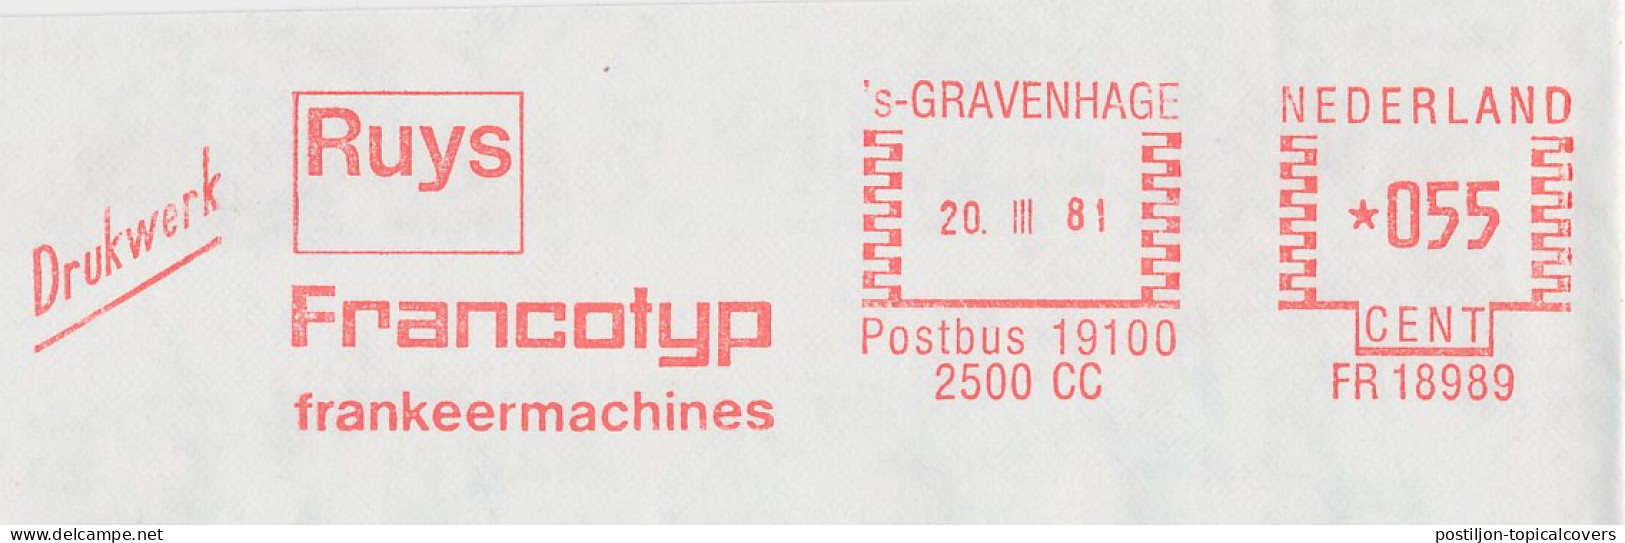 Meter Cover Netherlands 1981 Francotyp - The Hague - Machine Labels [ATM]